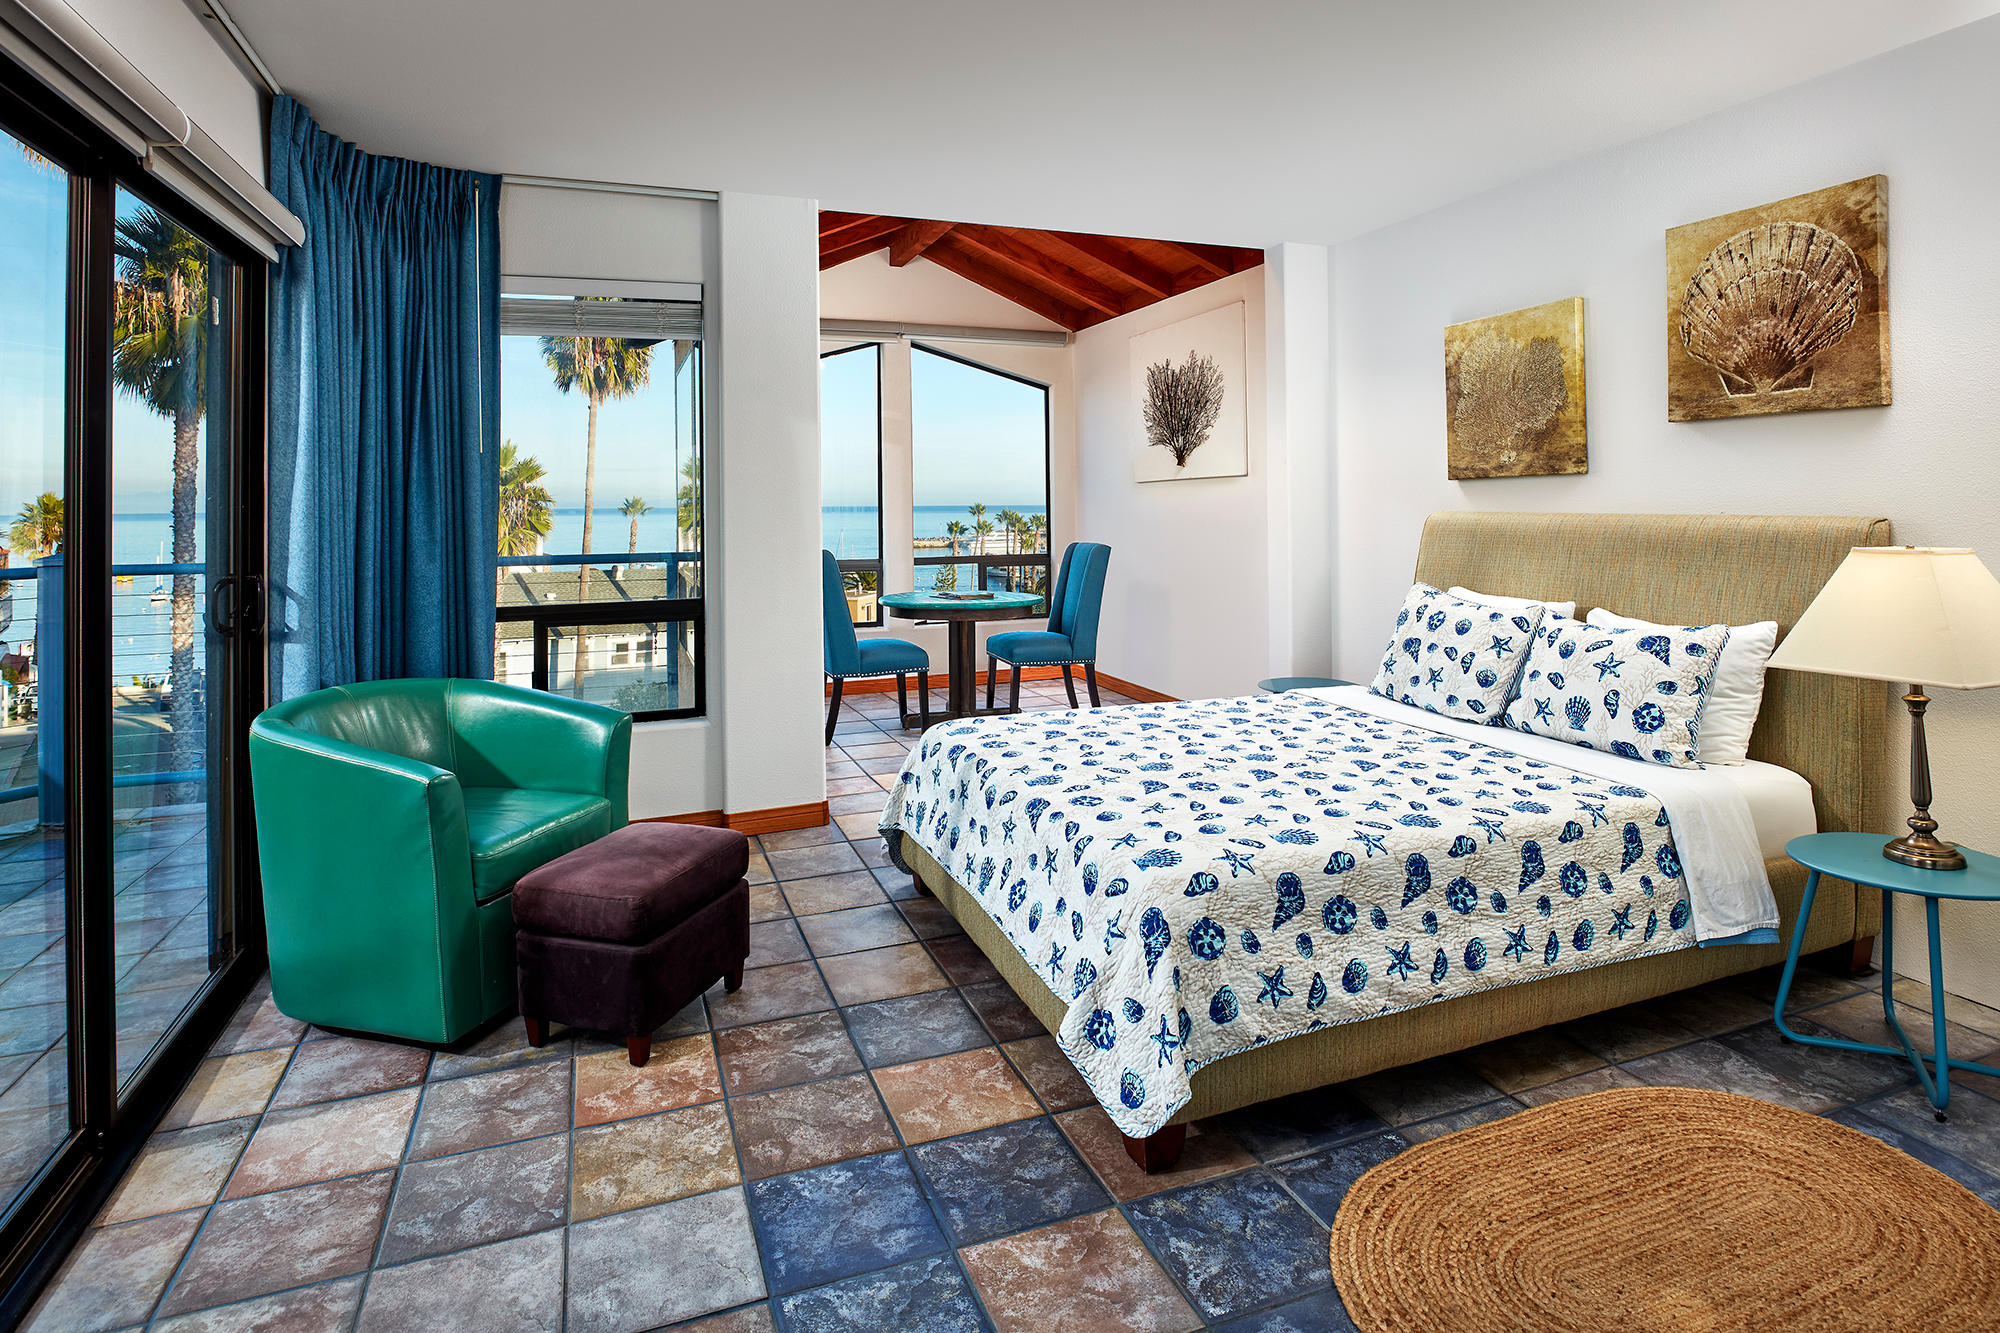 Seaport Village Inn Catalina Island Guest Rooms and Suites